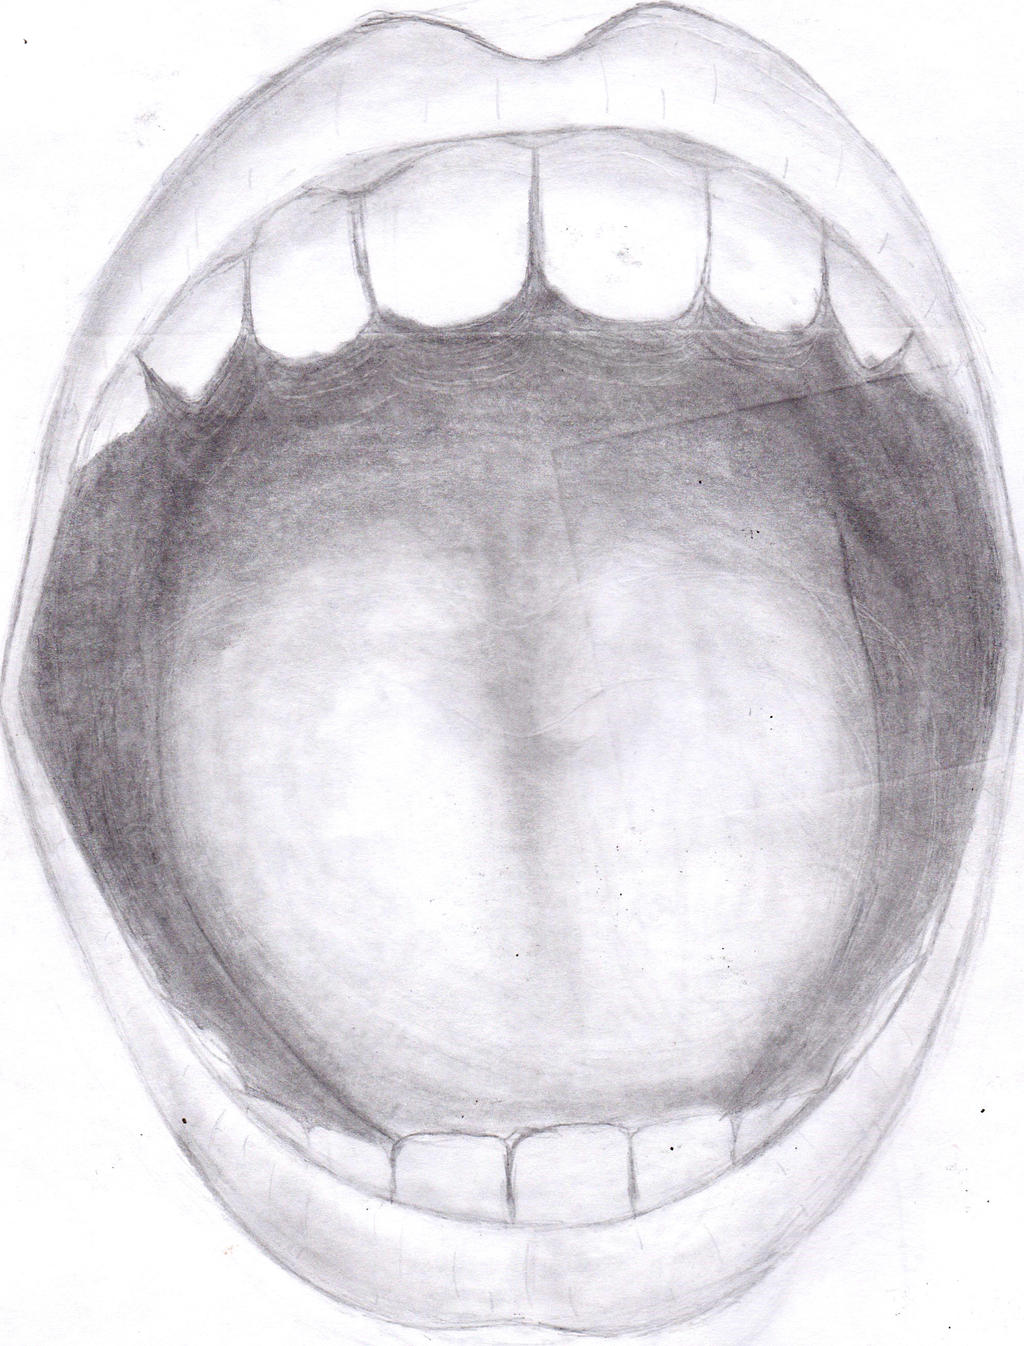 Greyscale Open Mouth Drawing by Lively983 on DeviantArt